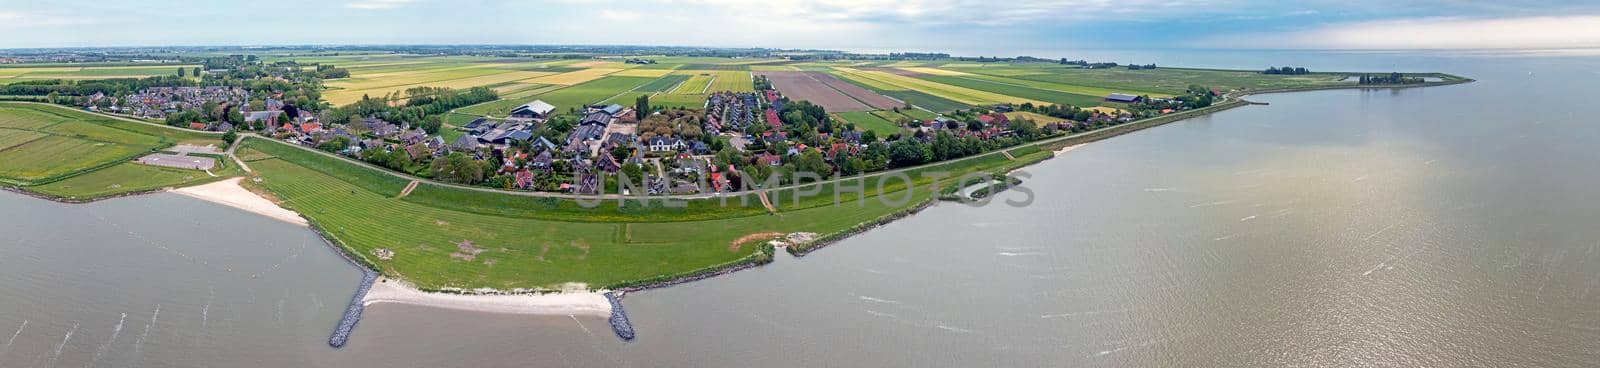 Aerial panorama from the village Schellinkhout at the IJsselmeer in the Netherlands